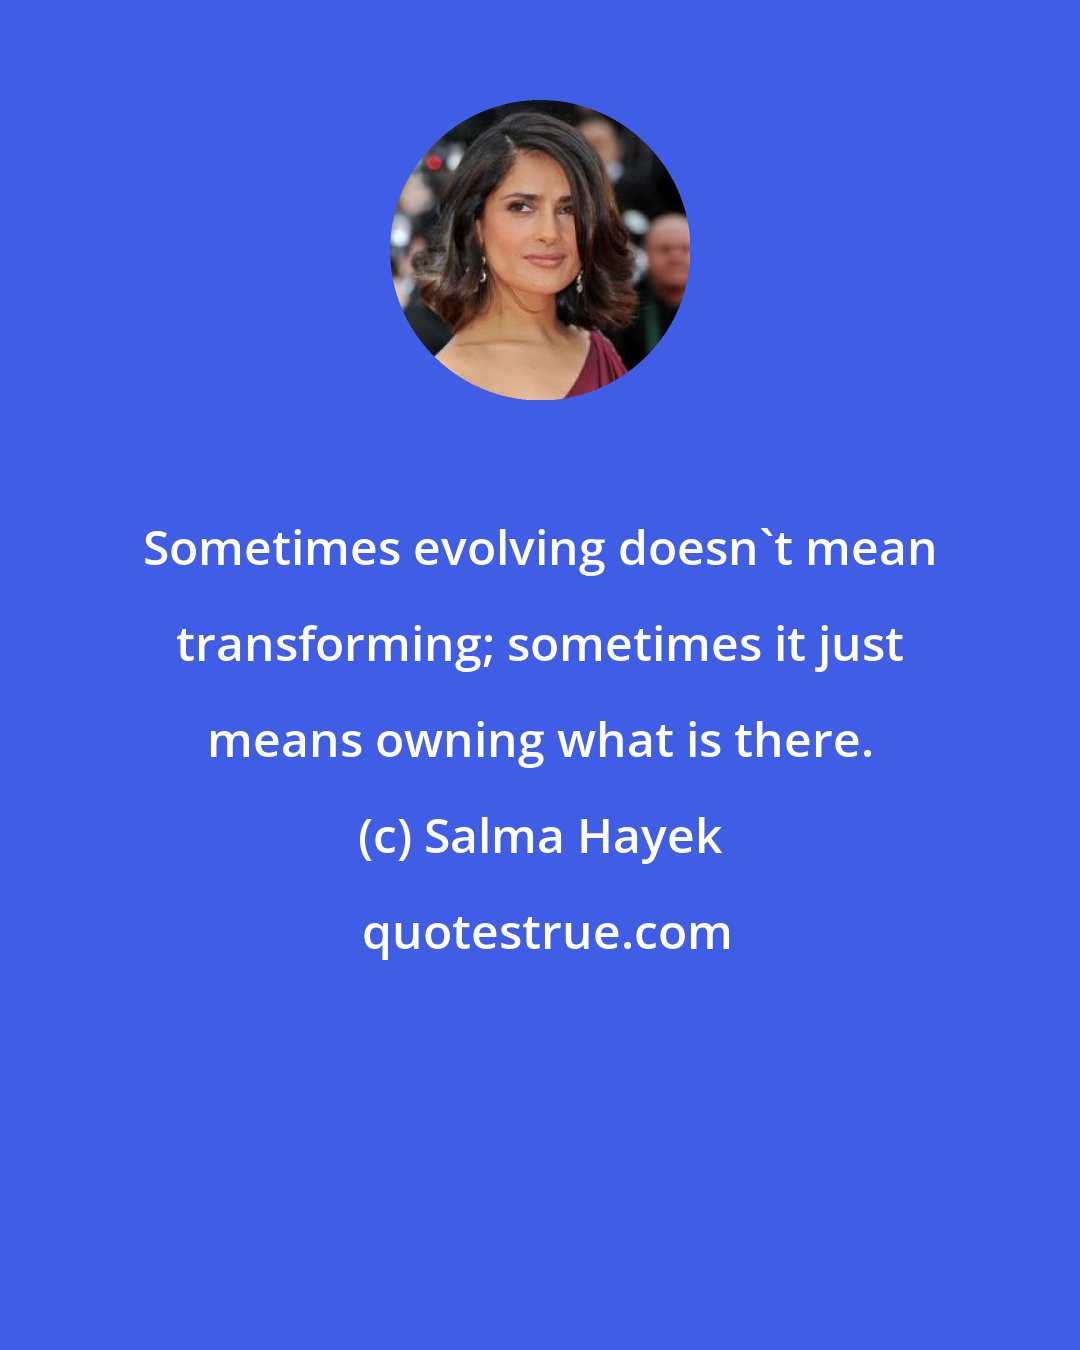 Salma Hayek: Sometimes evolving doesn't mean transforming; sometimes it just means owning what is there.